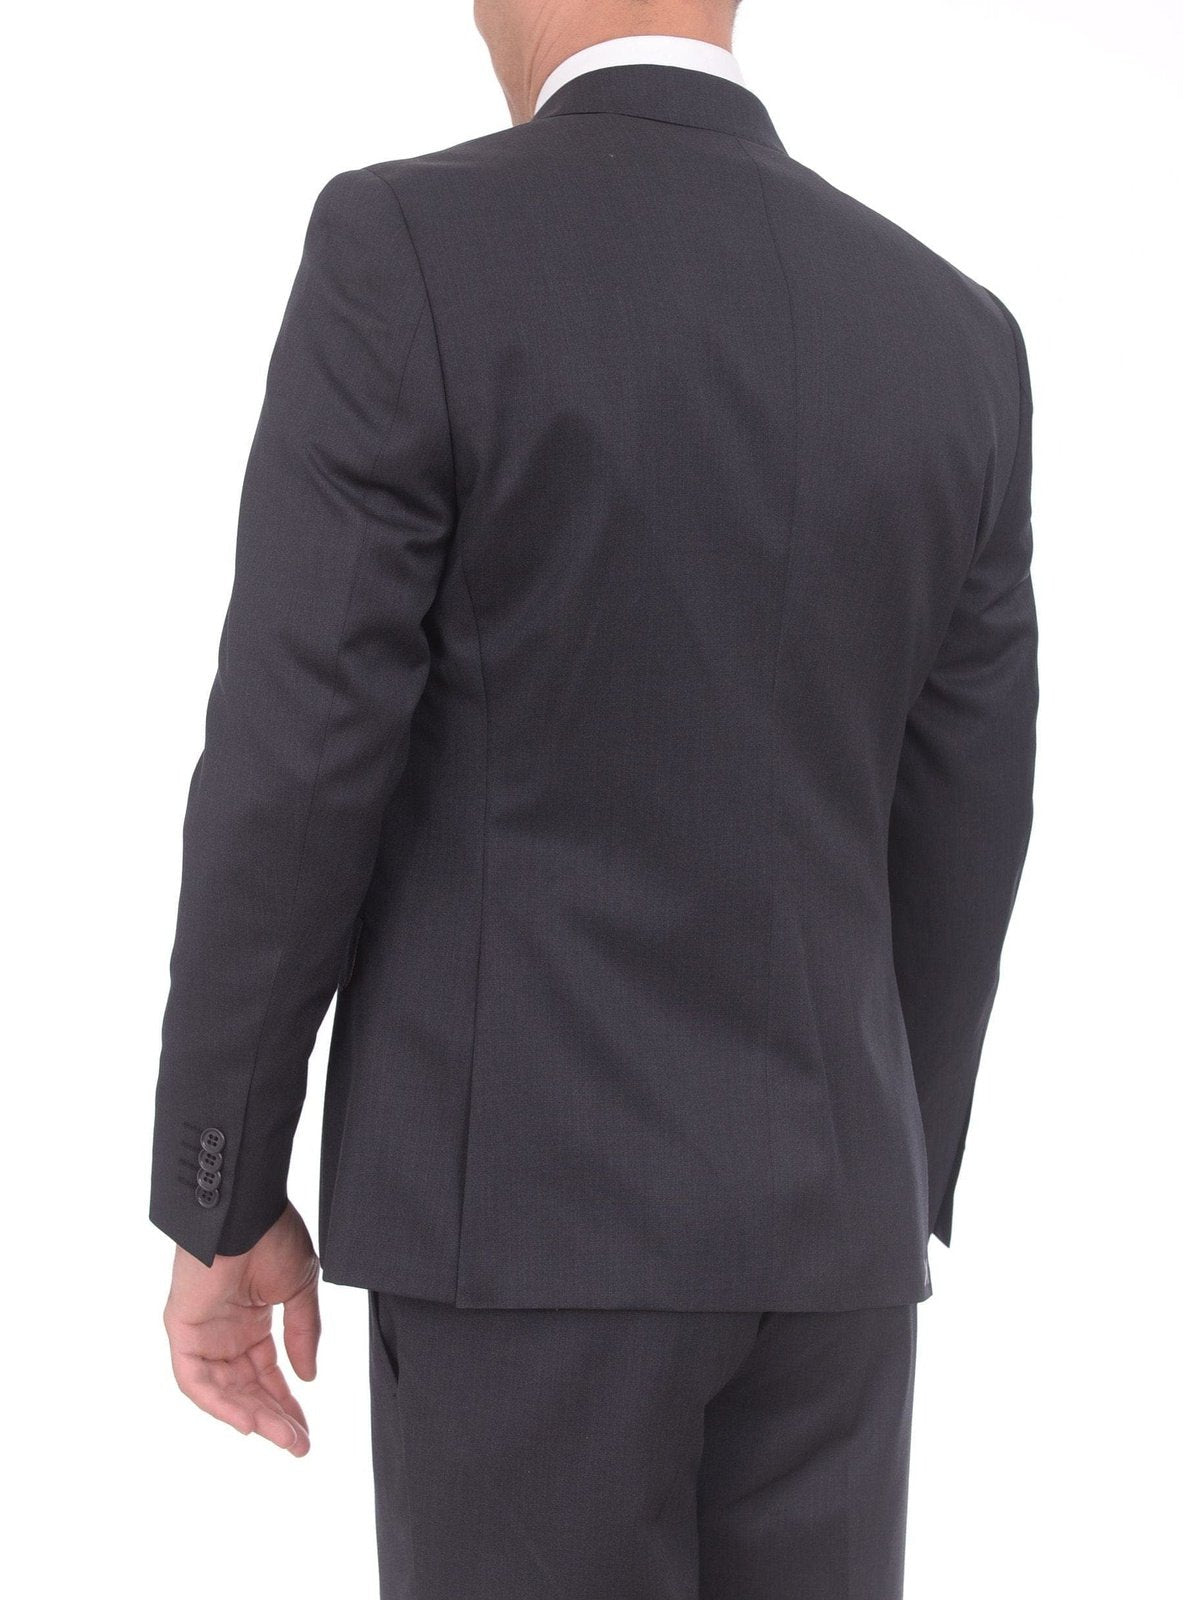 Ideal TWO PIECE SUITS Ideal Mens Slim Fit Solid Charcoal Gray Two Button Wool Suit With Peak Lapels